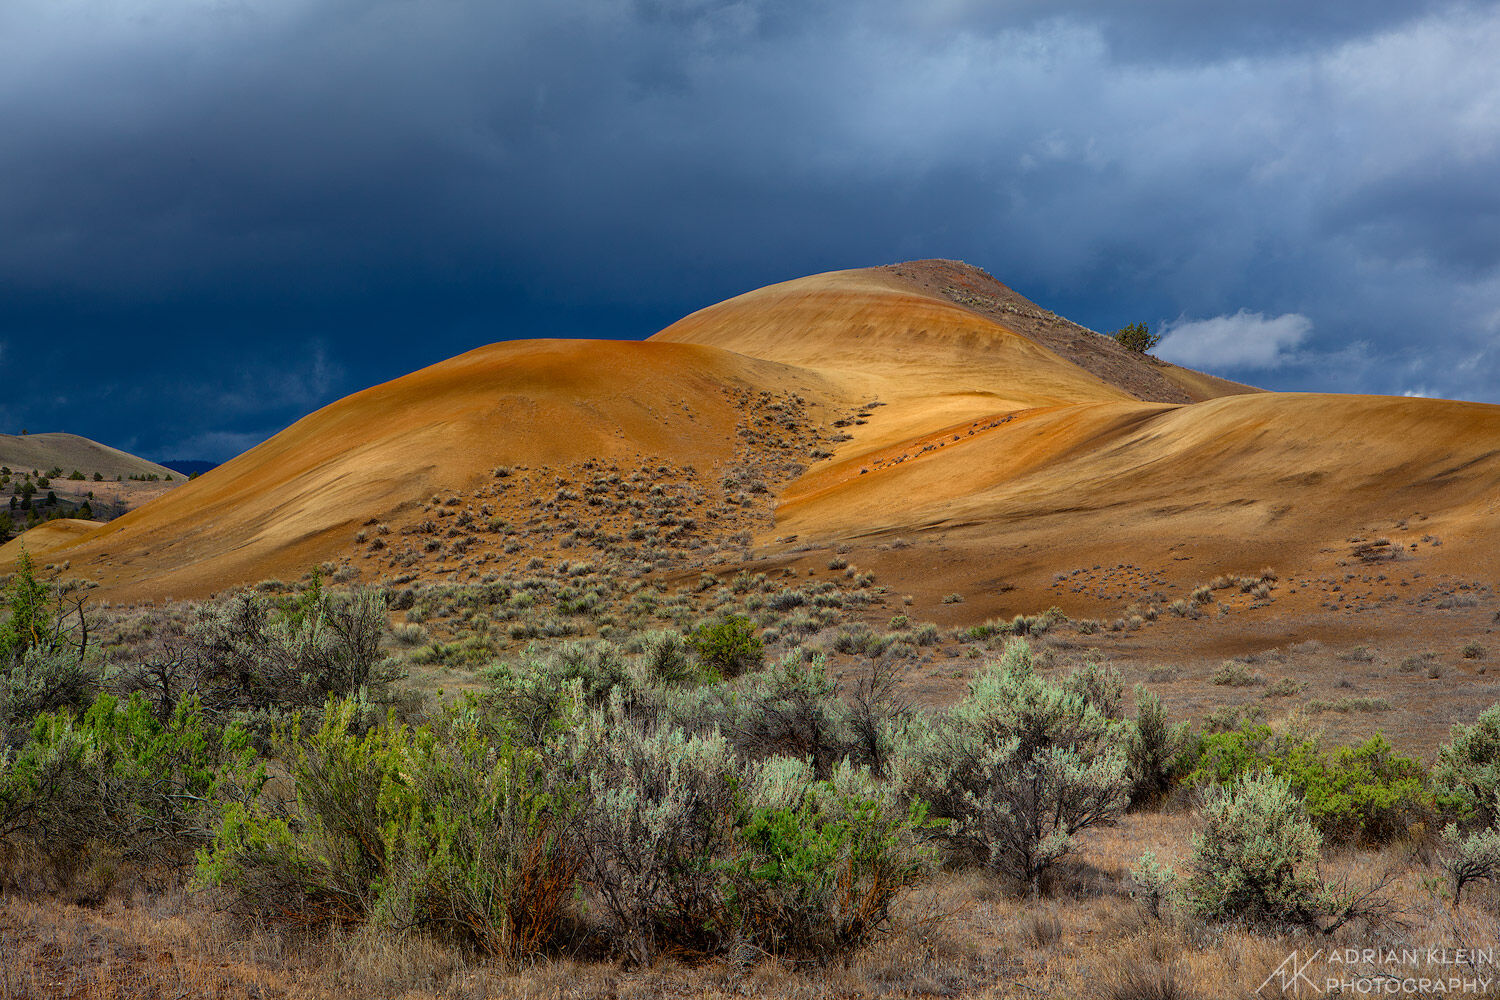 Hills in the area of Painted Hills Unit in central Oregon is lit up shortly after a passing storm.